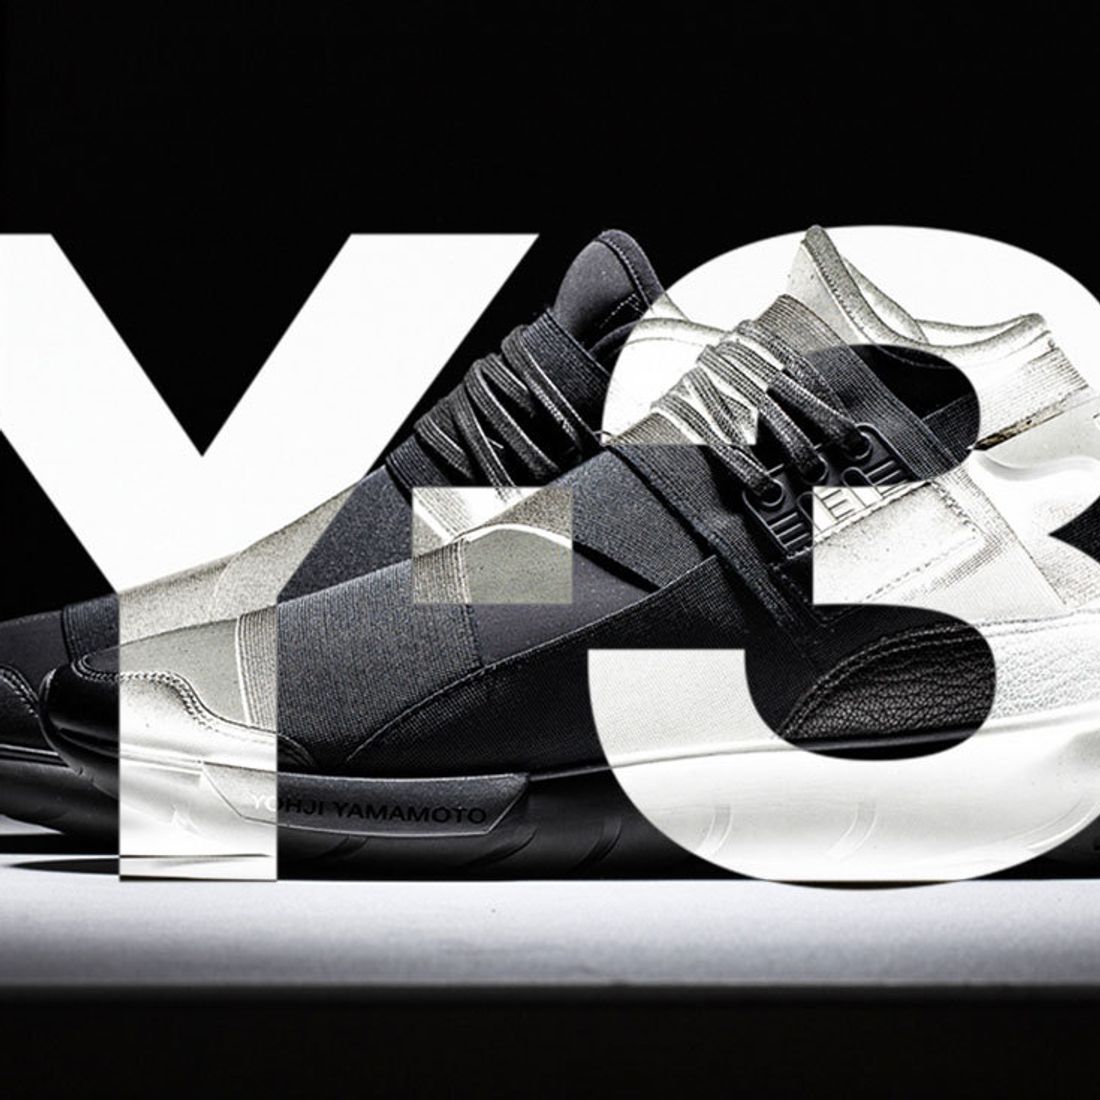 Material Matters: Influence of adidas Y-3 - Sneaker